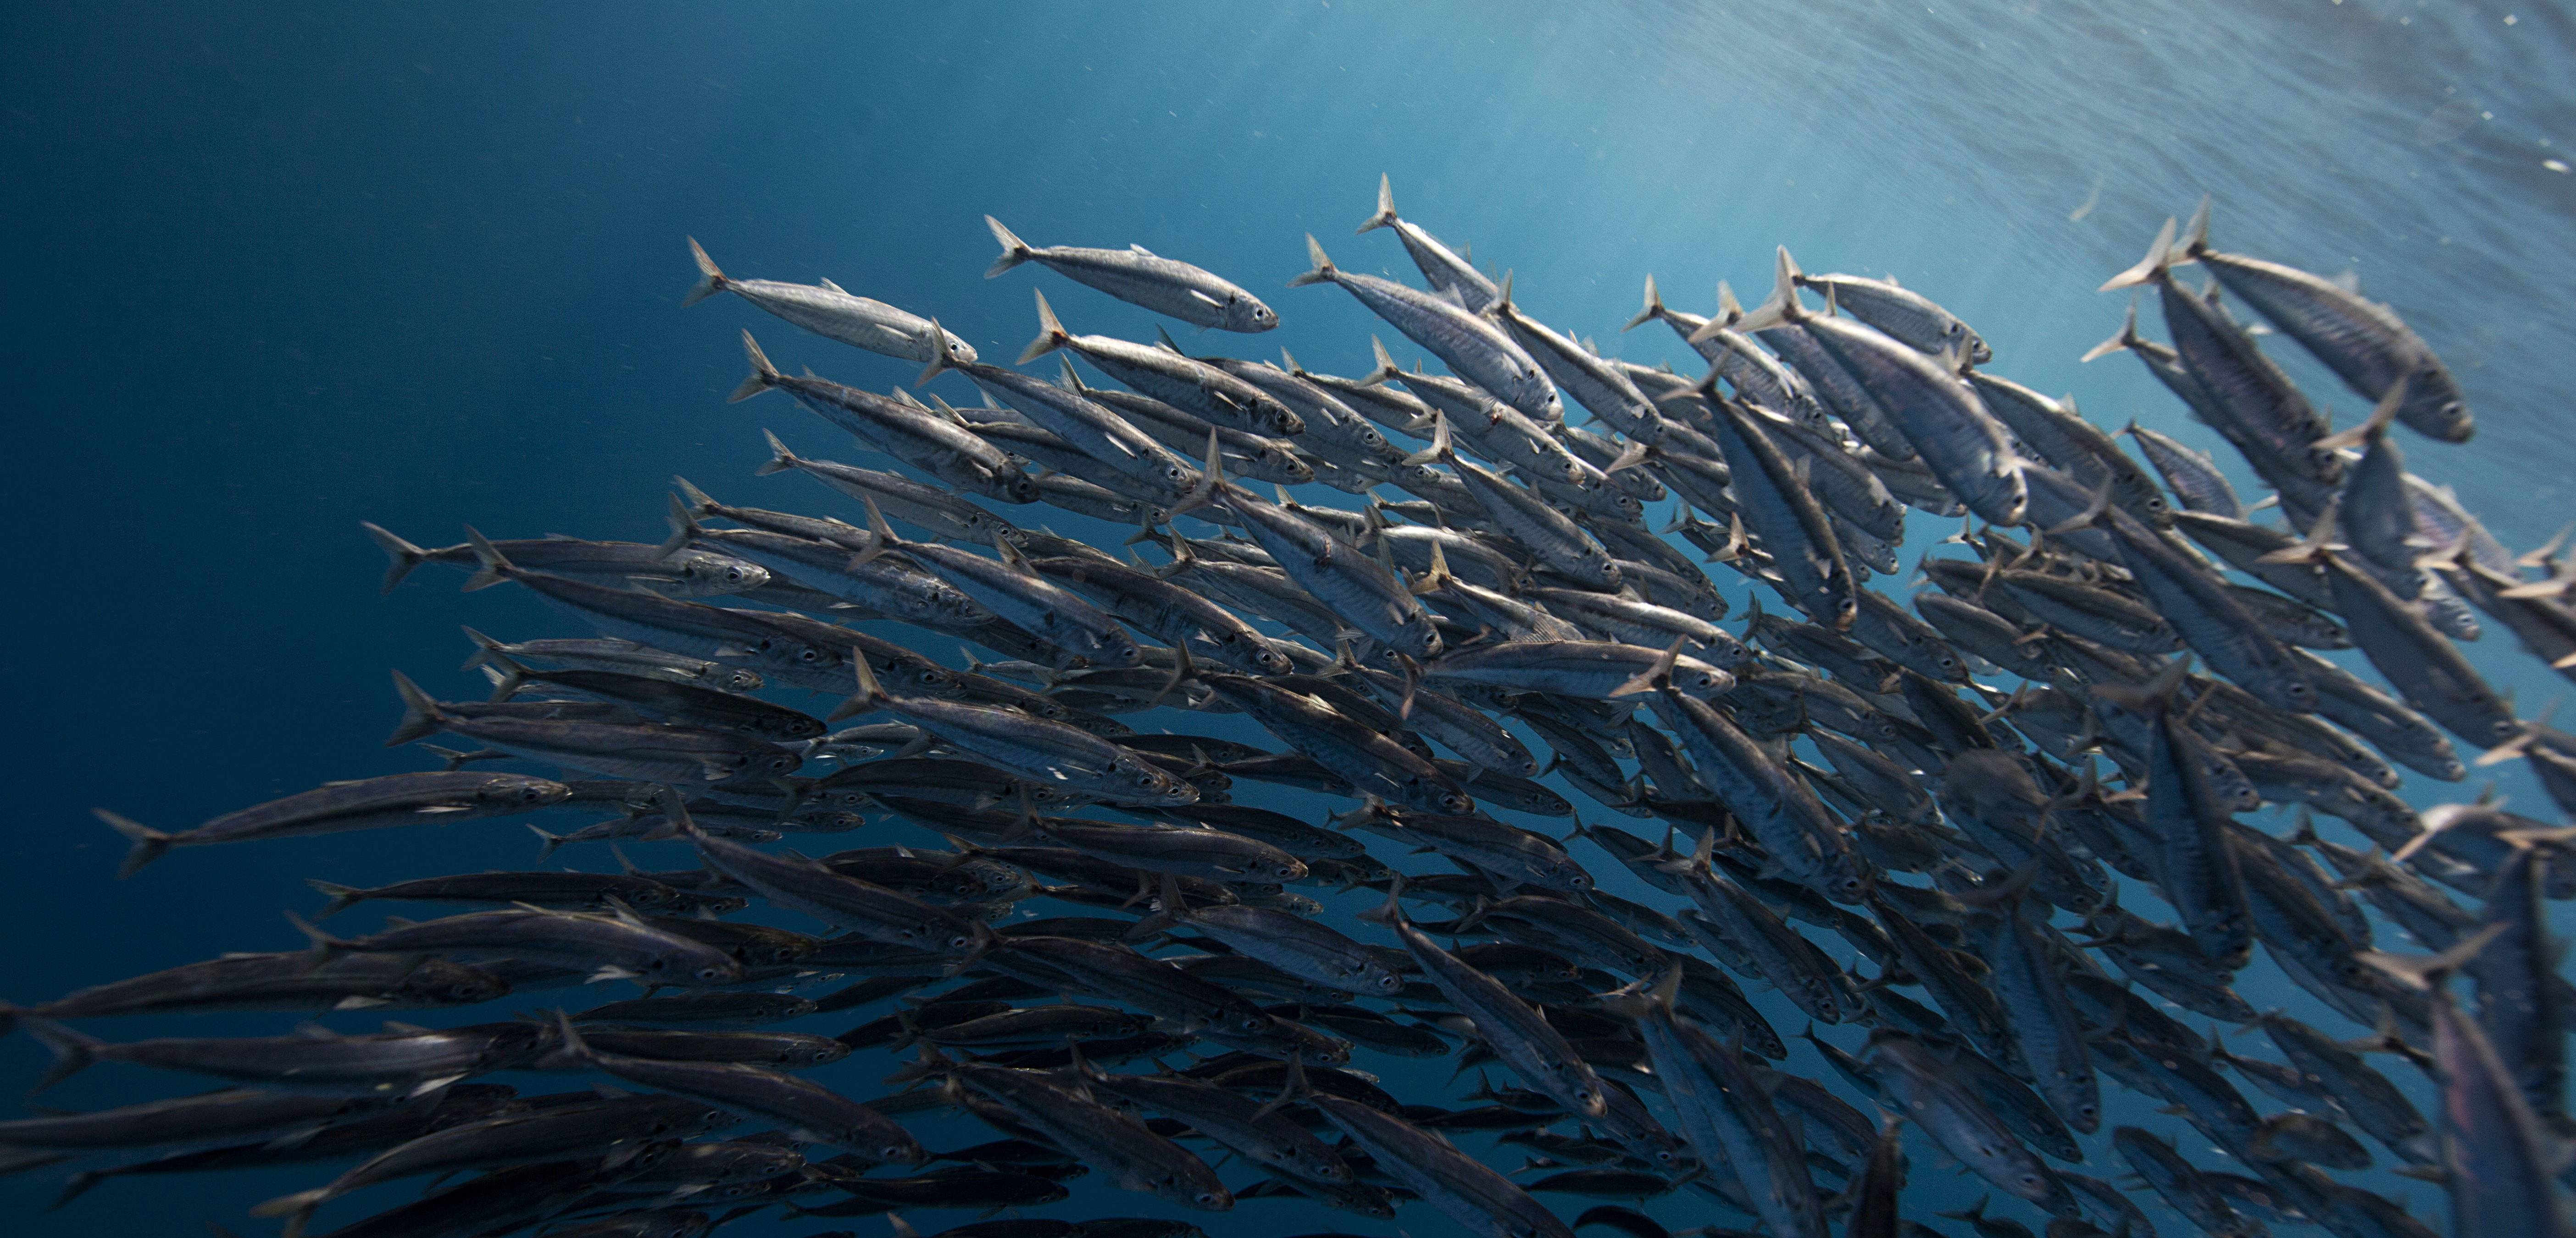 Sardines form a tight “baitball” in the water off California. Photo by jchauser/RooM the Agency/Corbis